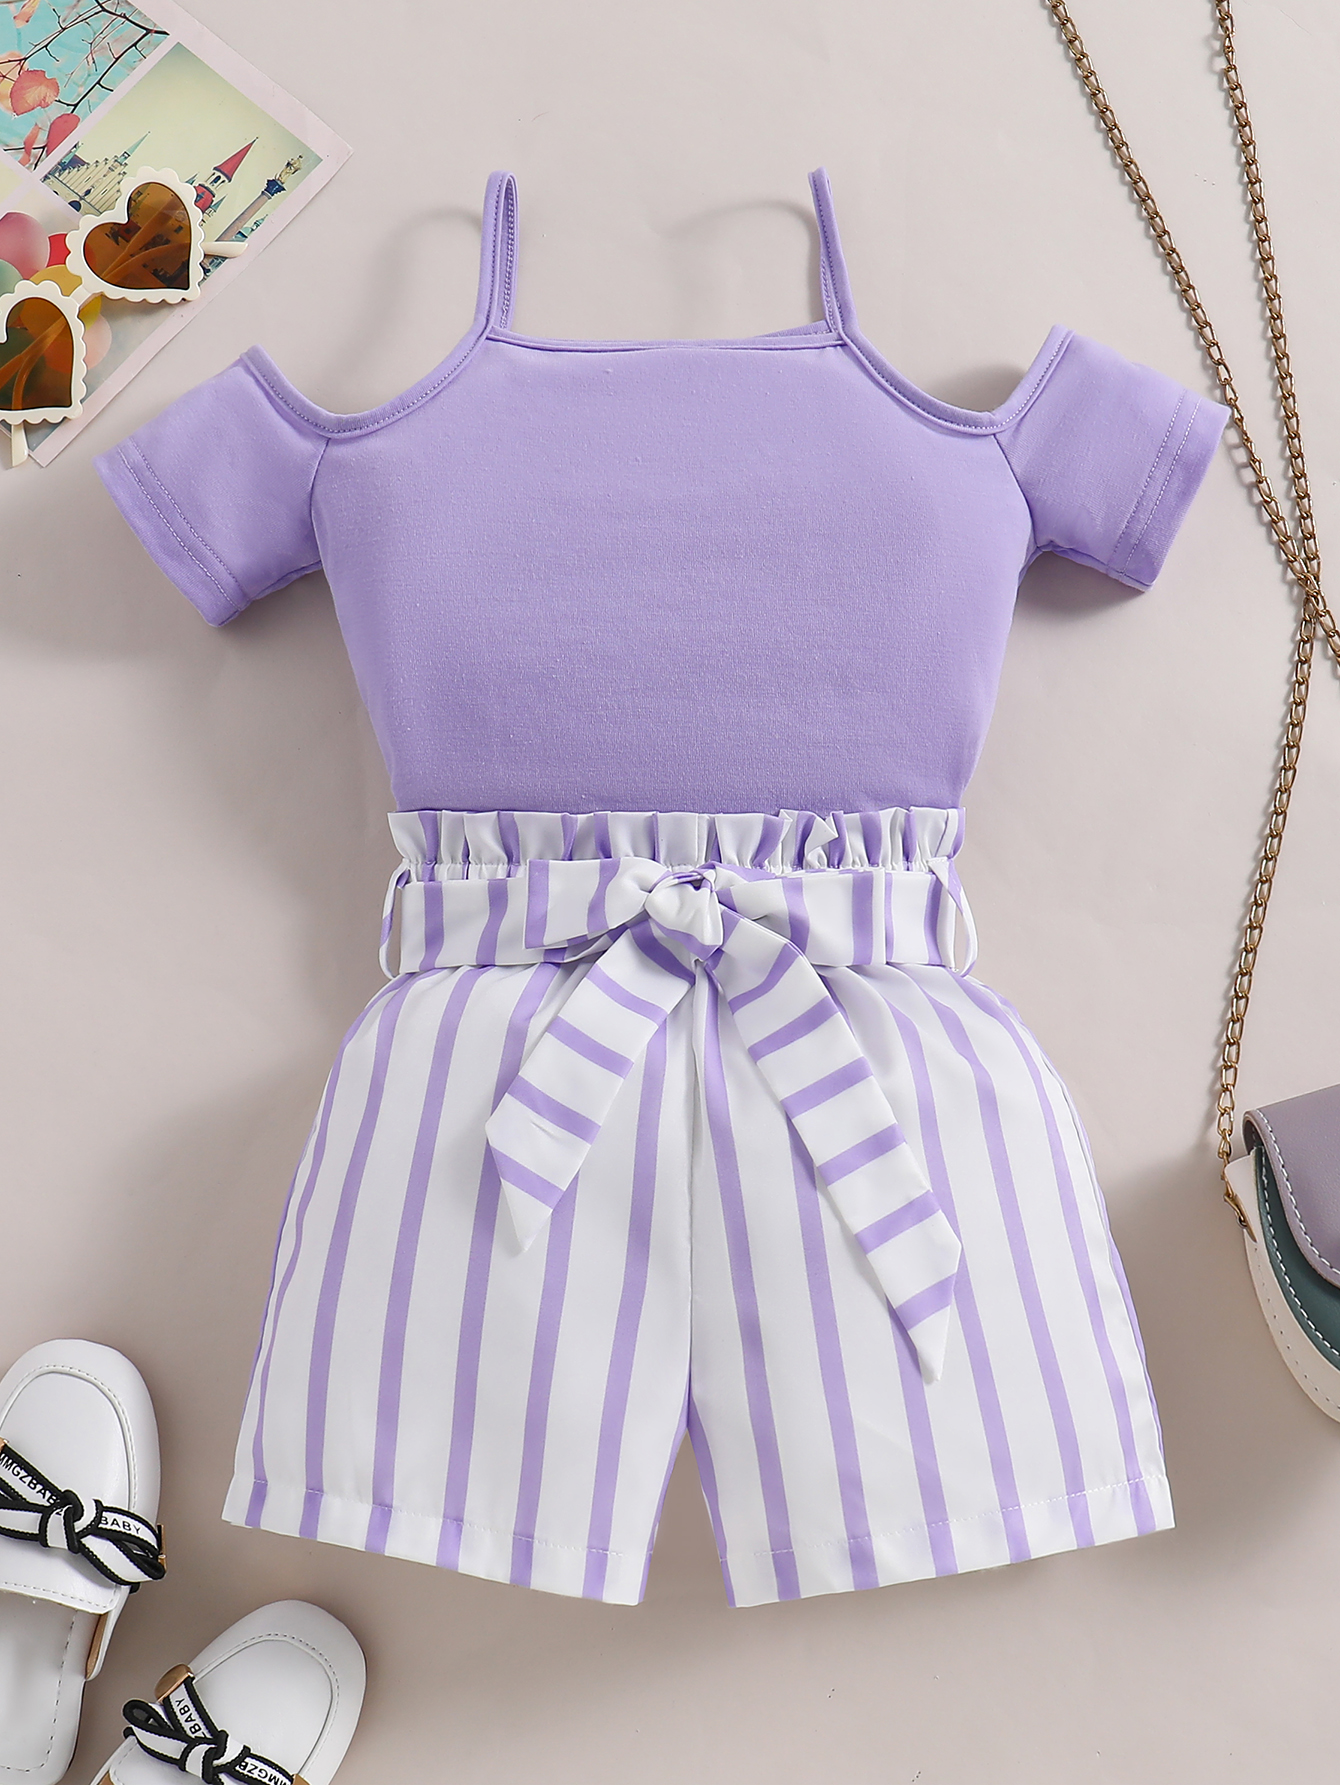 Avamo Ladies Two Piece Outfit Lace Up Party Sets Sleeveless Cami And Pants  Set Soft 2-Piece-Set Travel Purple Print M 